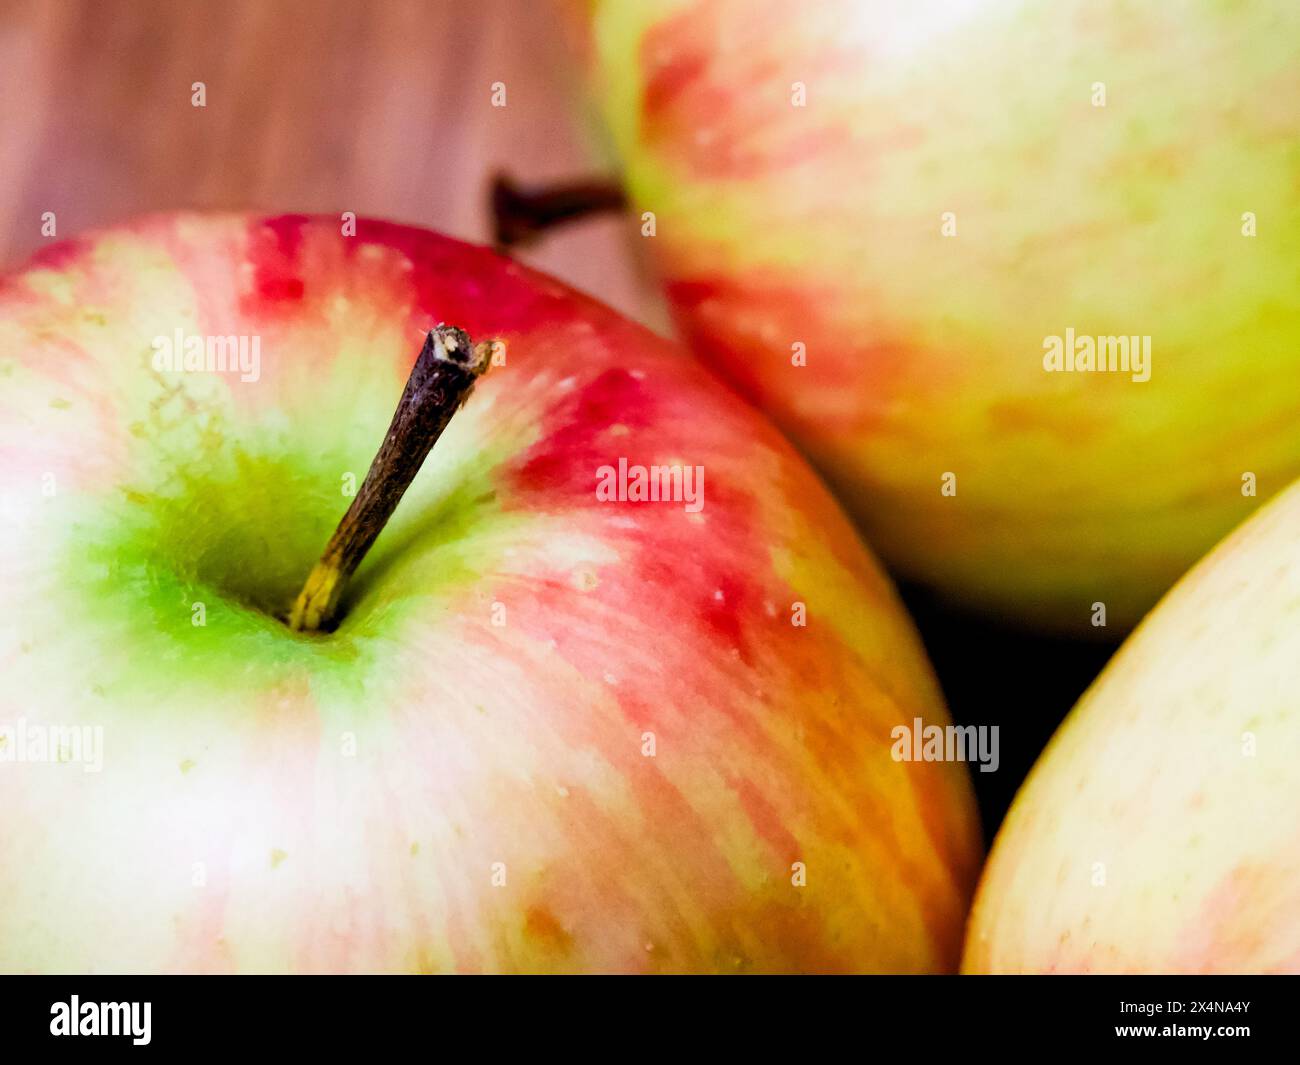 Colorful Apple Composition. Apples with varying shades, set against wood, suitable for dietary content. Stock Photo